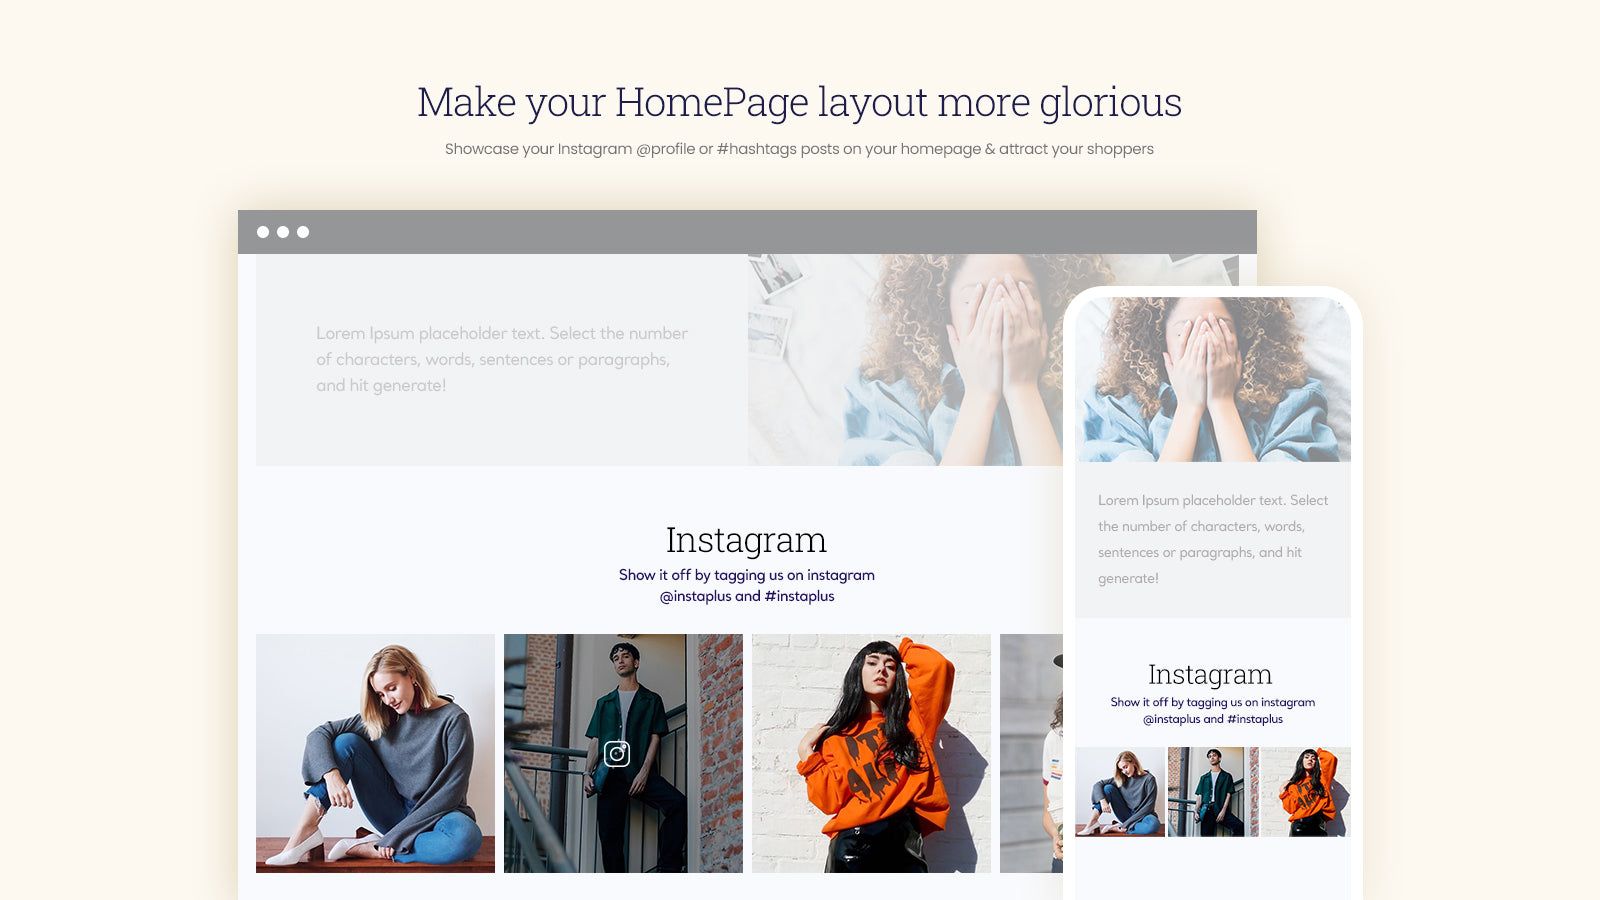 Showcase Instagram posts on the homepage & attract customers.